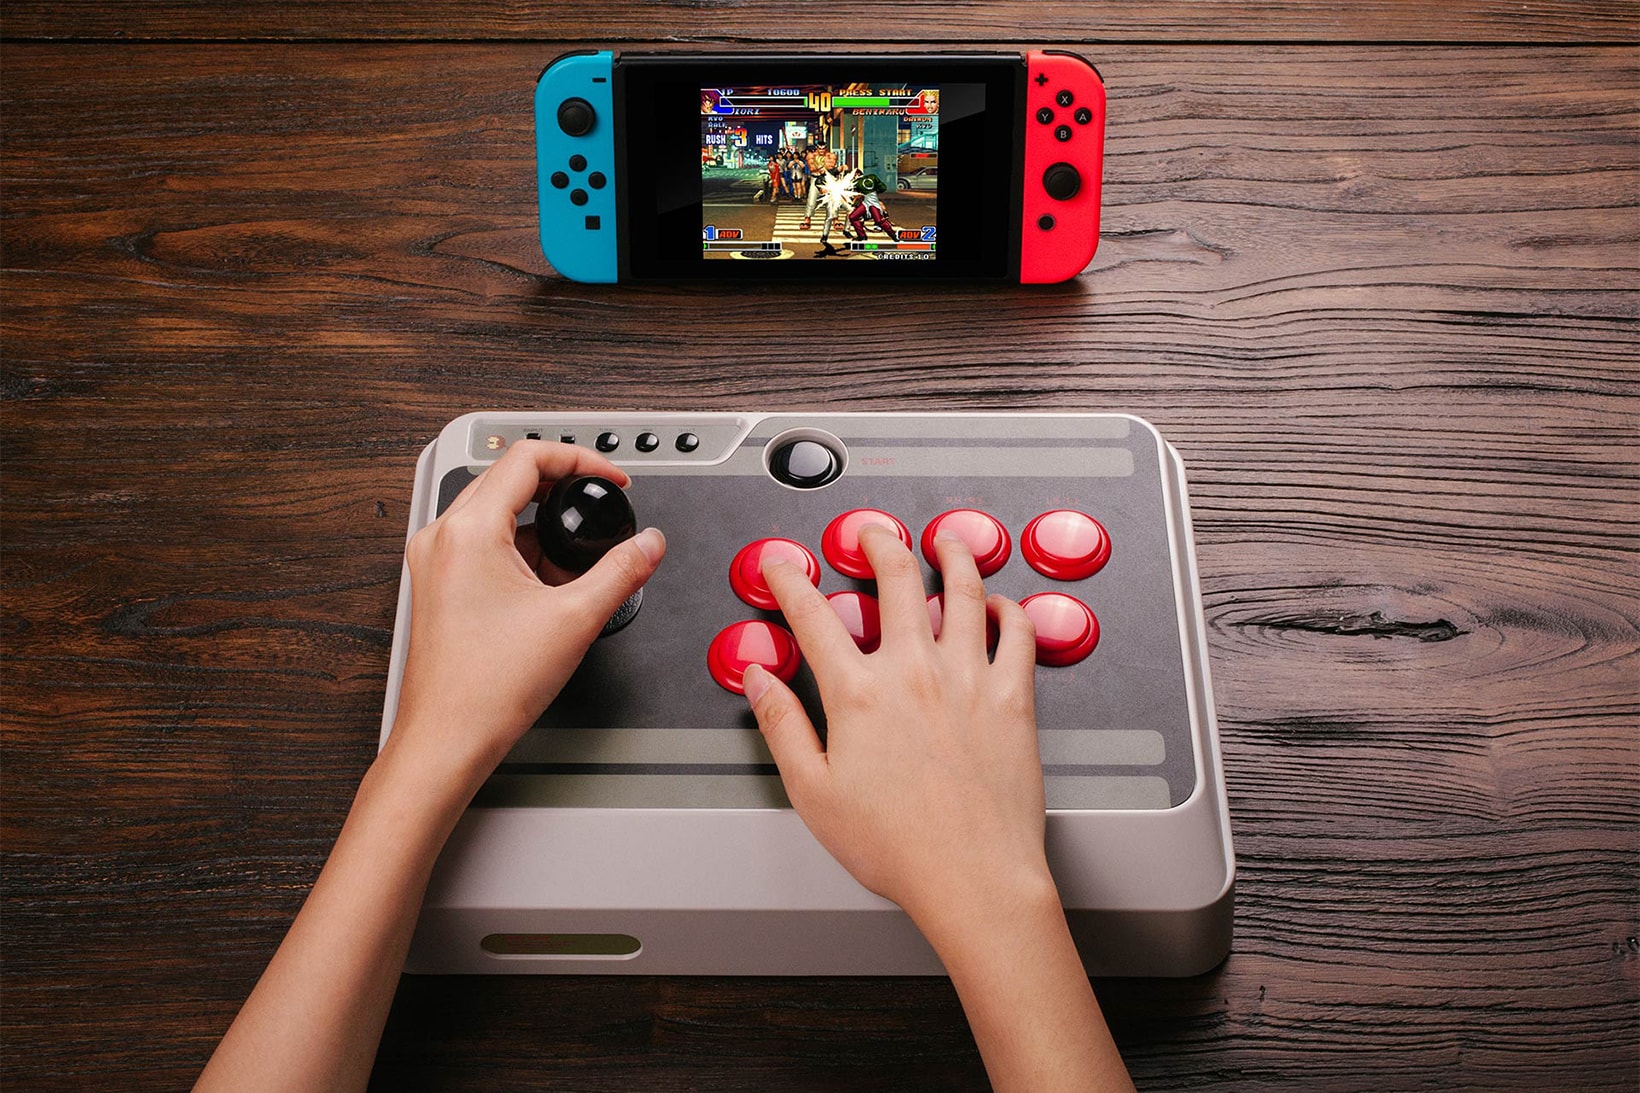 8Bitdo NES30 Arcade Stick Fighting Games Nintendo Switch Windows Android Apple macoS Mac Steam PC Compatible